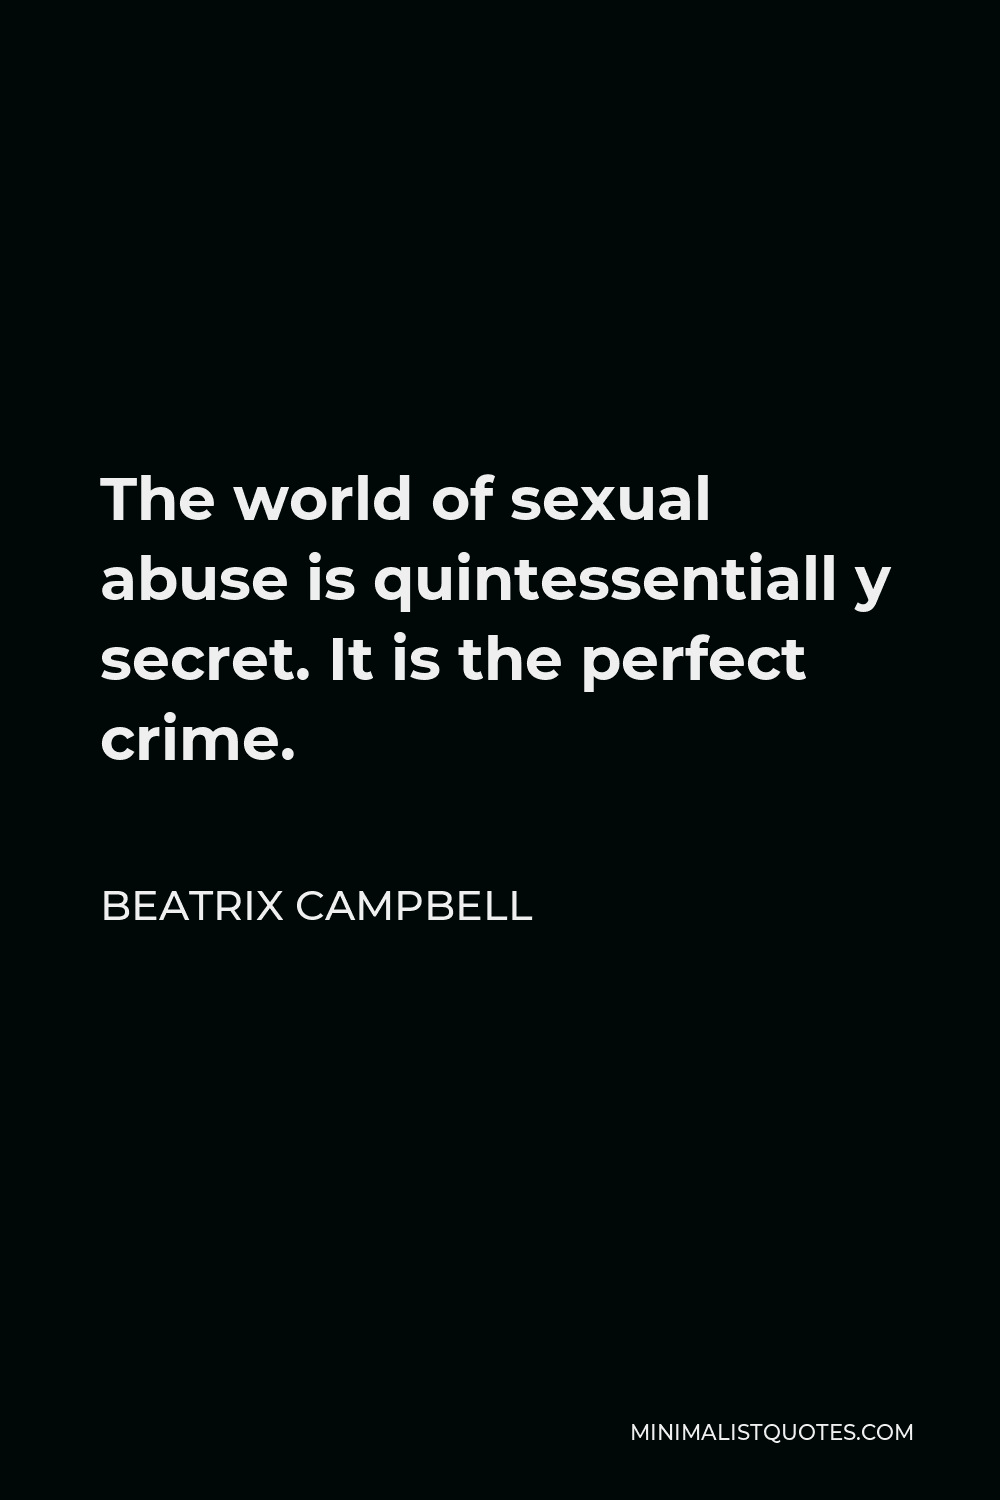 Beatrix Campbell Quote - The world of sexual abuse is quintessentiall y secret. It is the perfect crime.